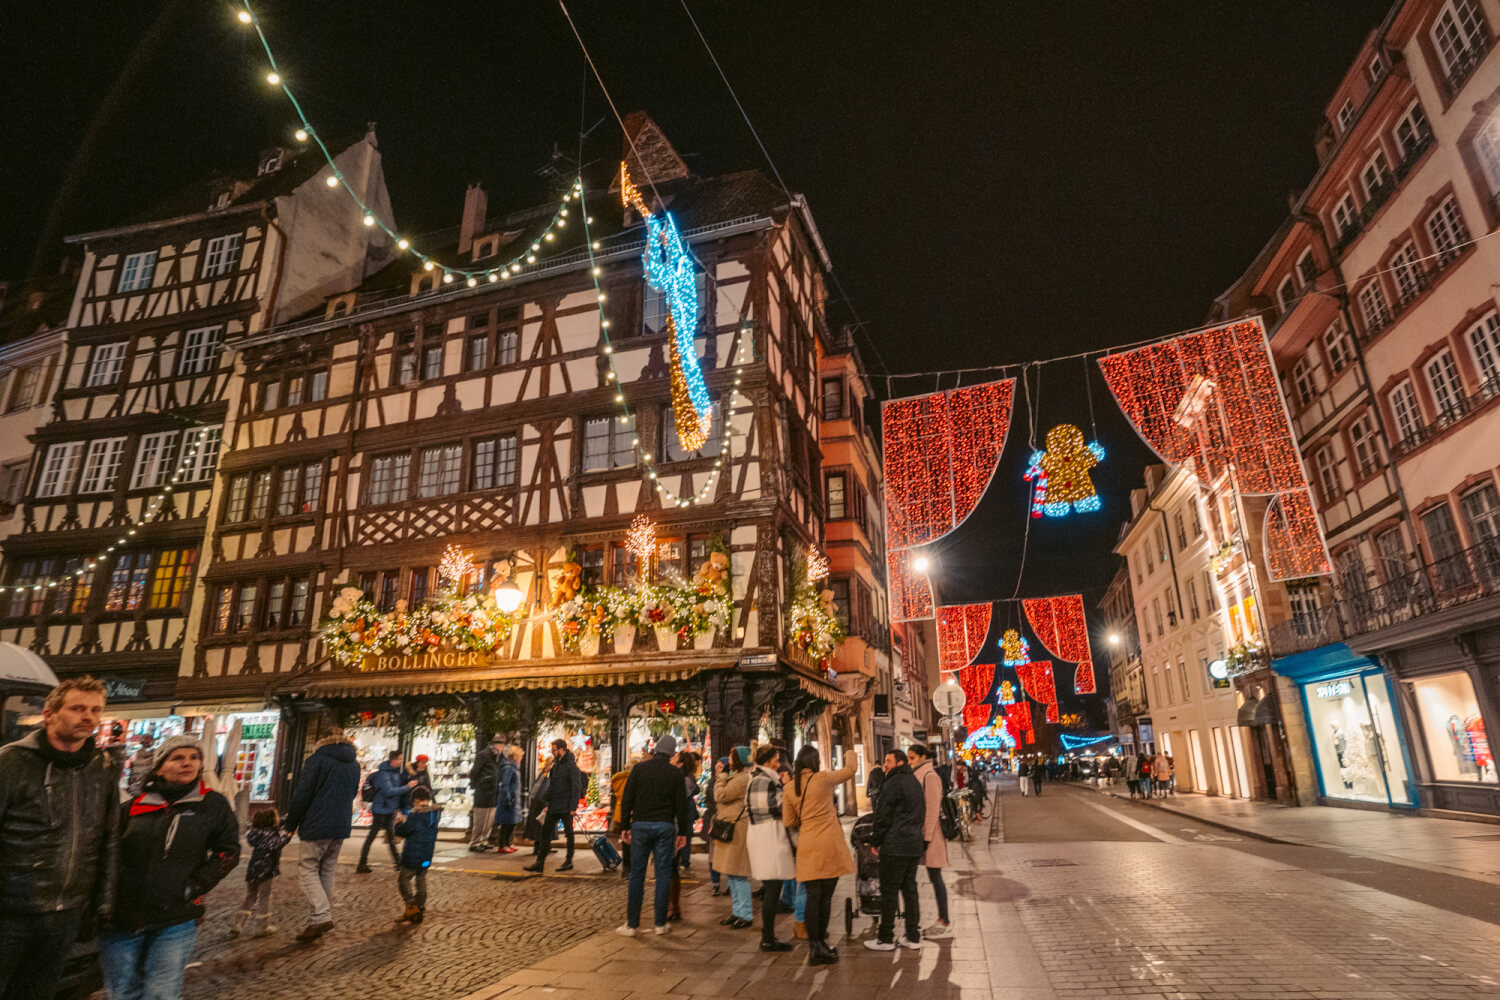 Country Hosted At Strasbourg Christmas Market 2022 Strasbourg Christmas Markets | 2022 Dates, Locations & Must-Knows!